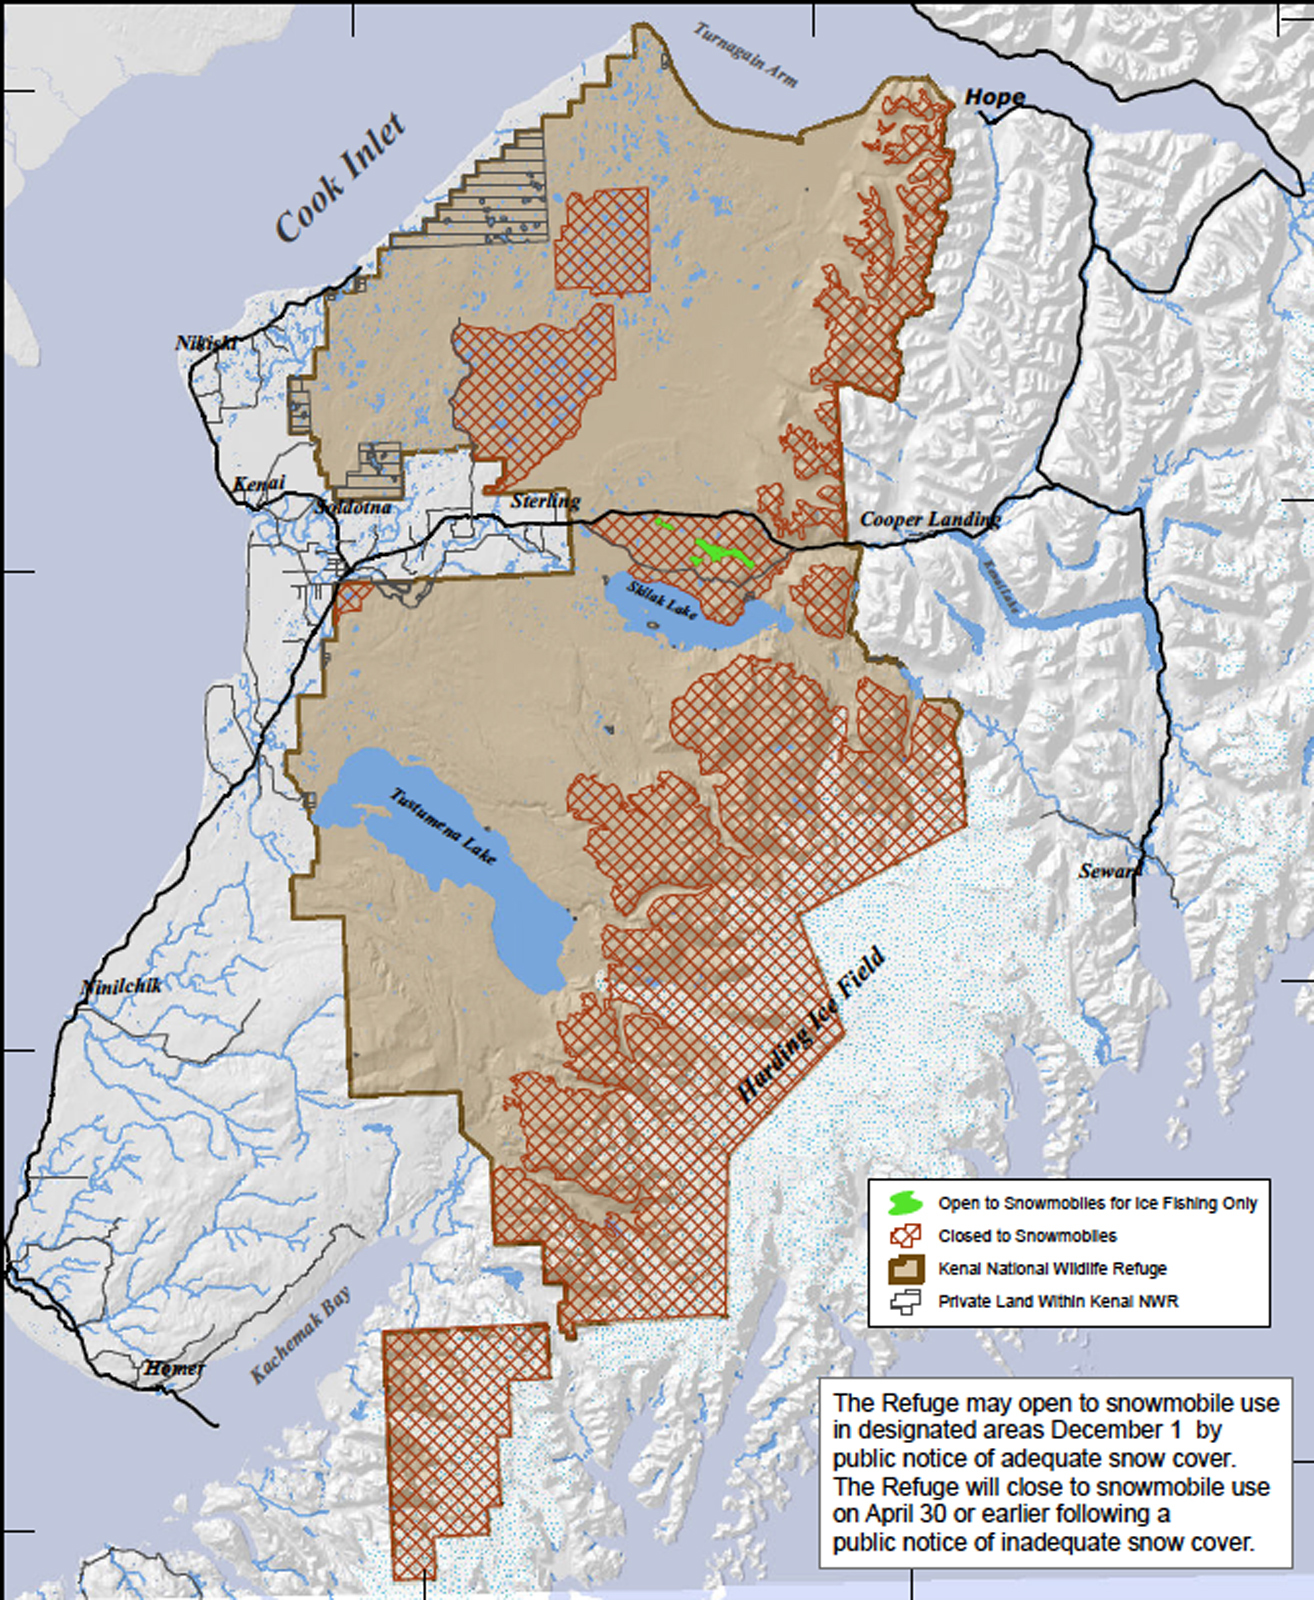 This map generated by the Kenai National Wildlife Refuge shows the areas that are open and closed to snowmachining on the Kenai Peninsula. The refuge opened all areas traditionally allowed for snowmachining Tuesday, Jan. 17, 2017 after the peninsula got enough snowfall over the weekend. (Photo courtesy Kenai National Wildlife Refuge)